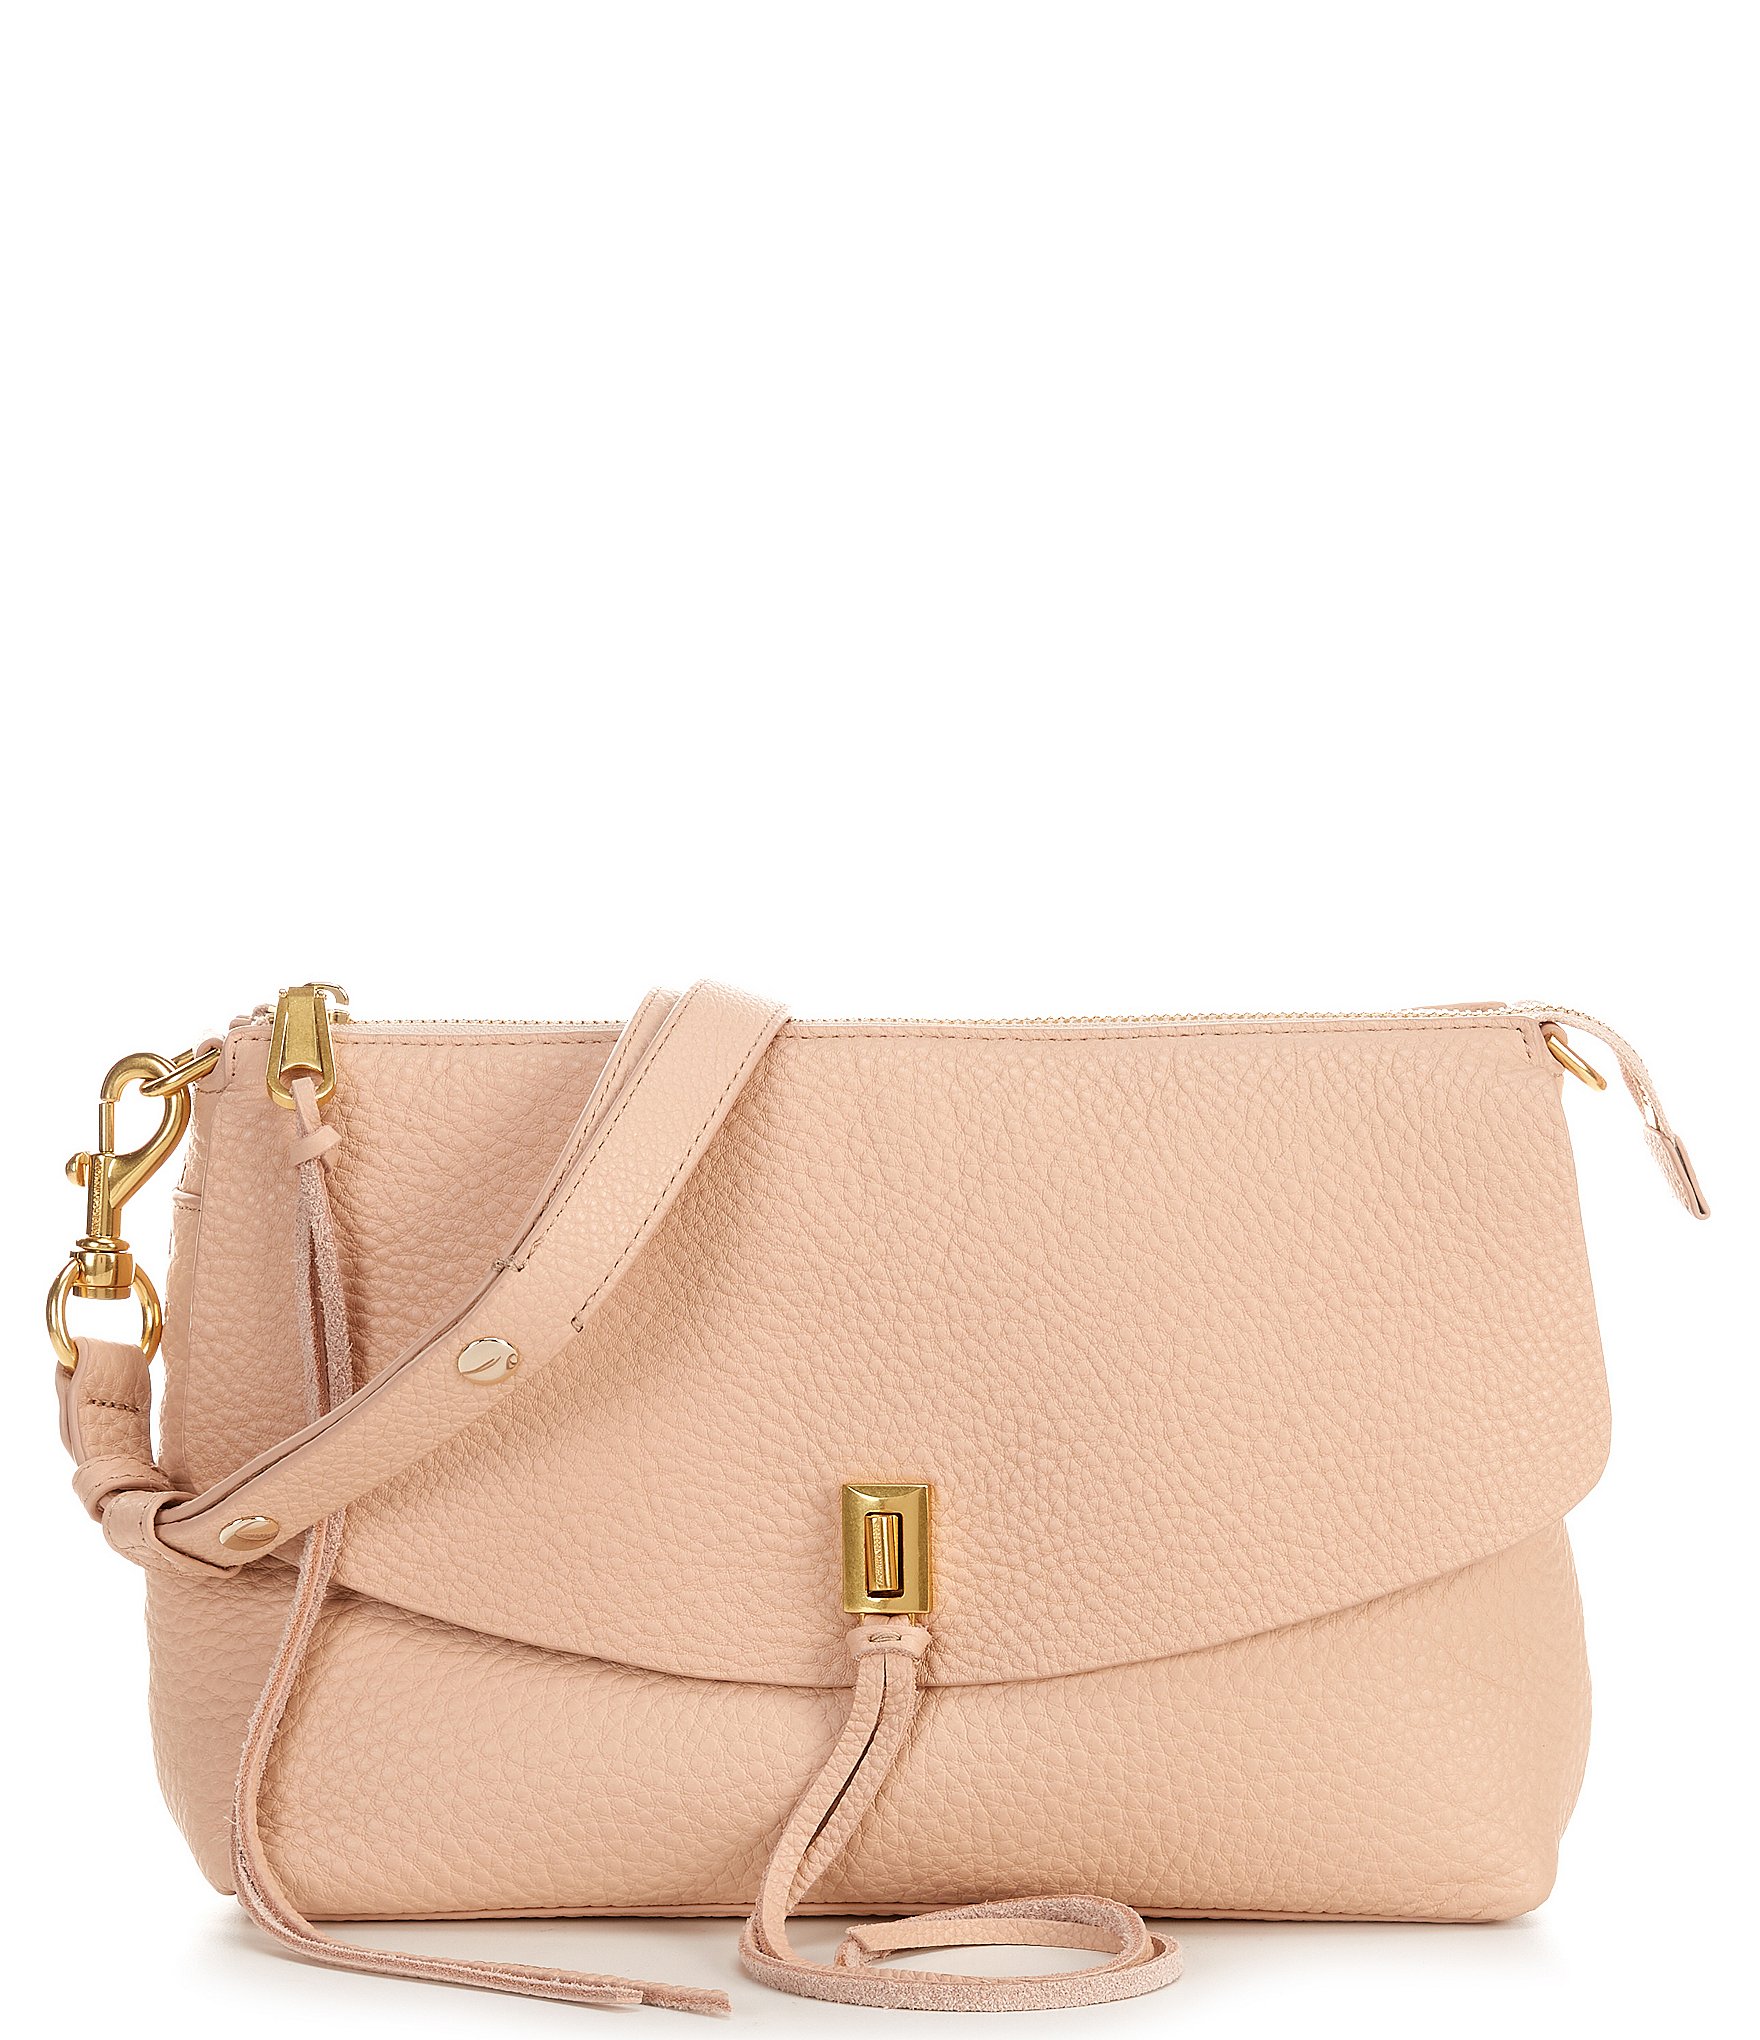 GUESS cross body bag Katey Luxury Satchel Natural / Camelia